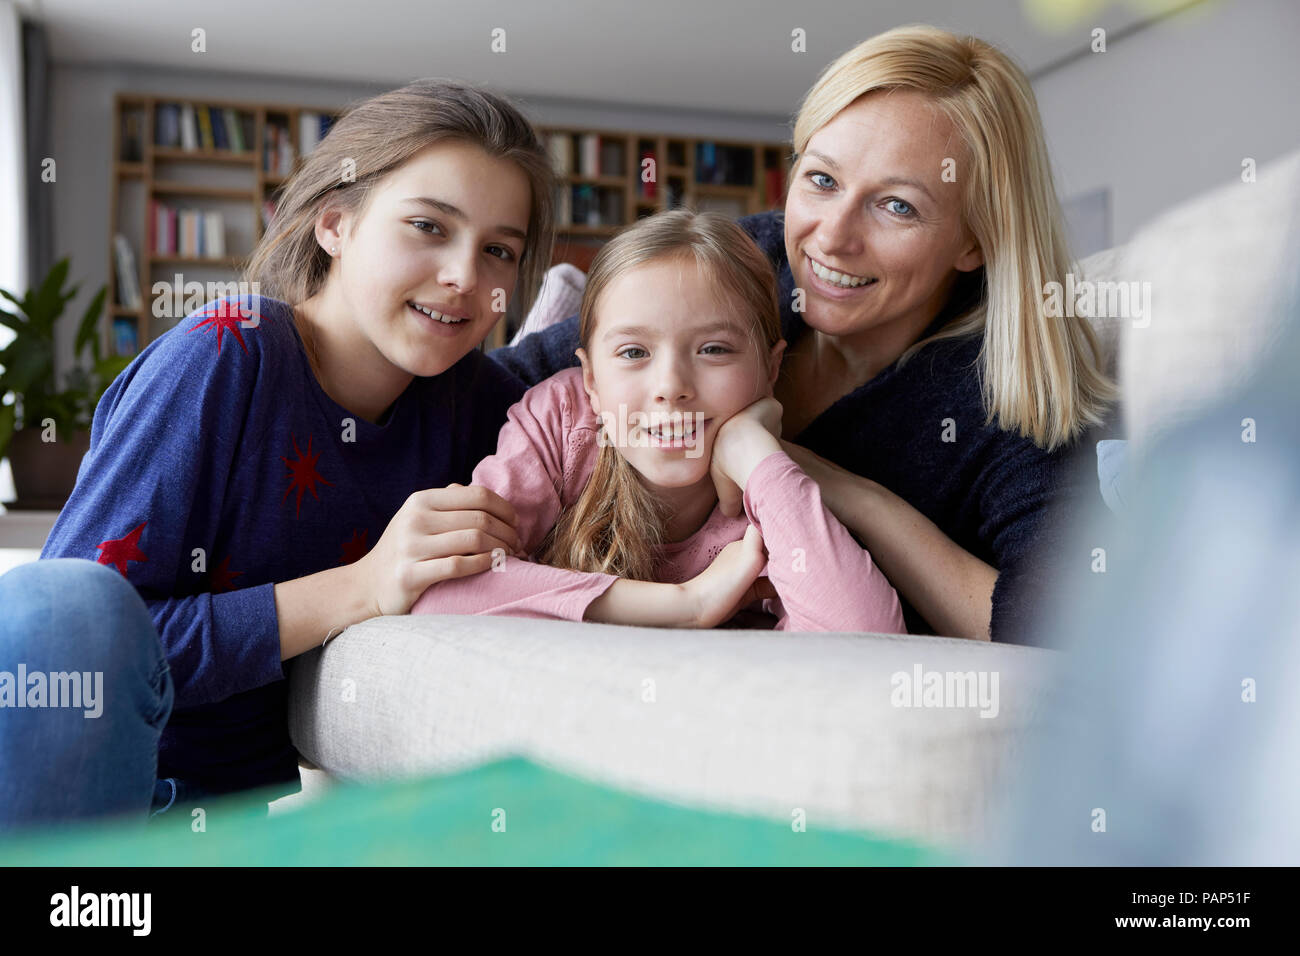 Mother and daughters having fun at home Stock Photo